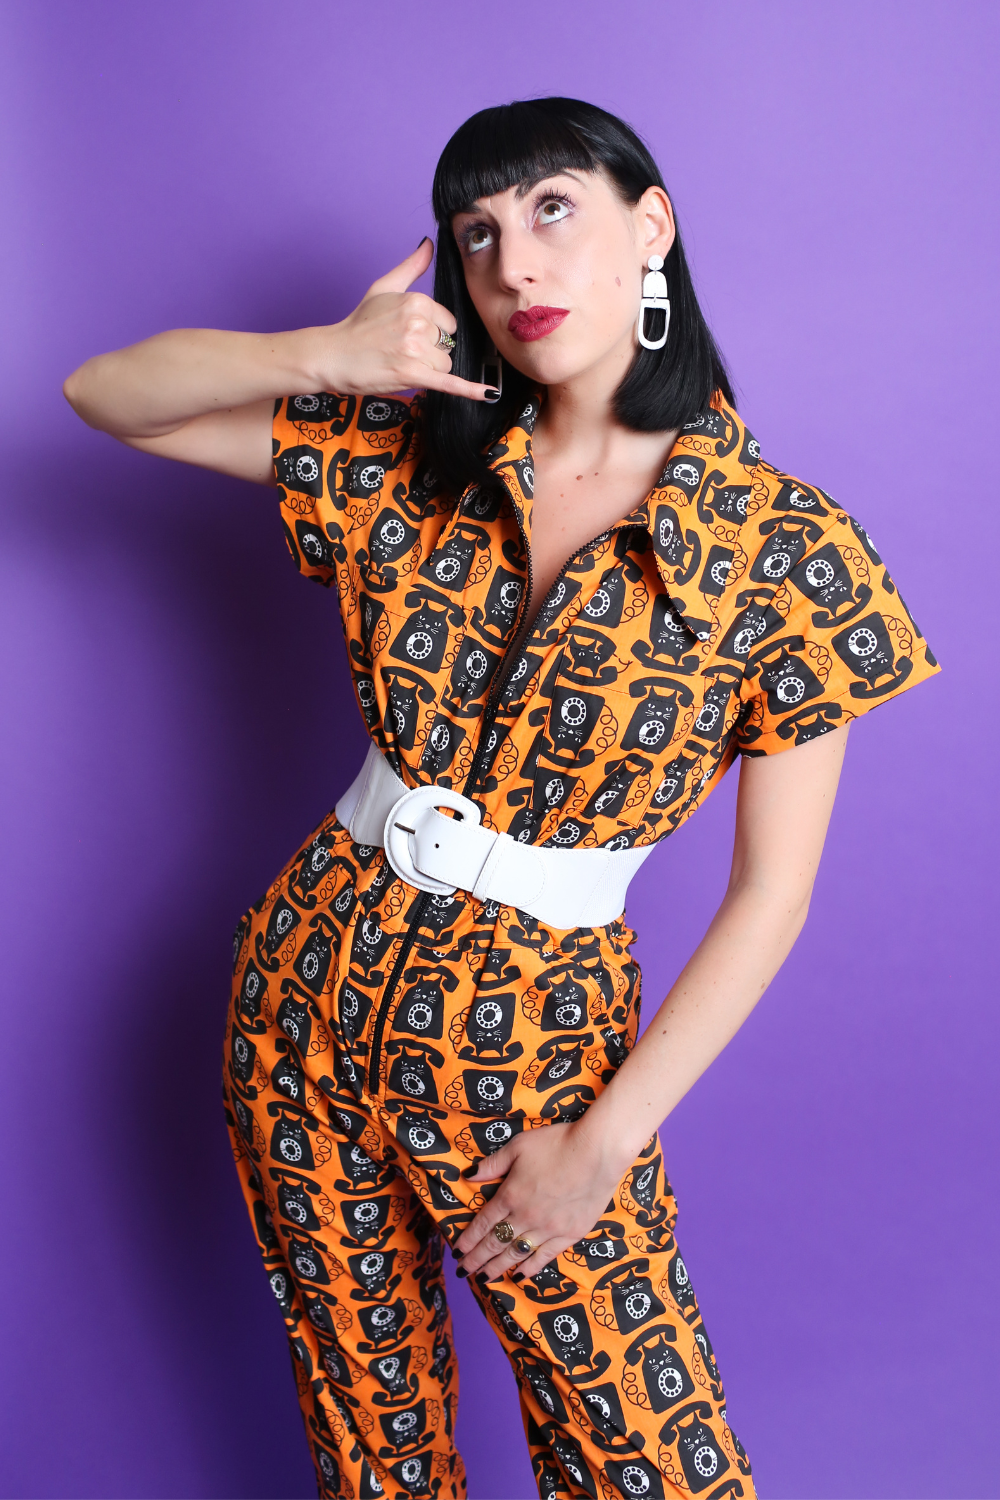 Black-haired model in orange and black cat phone print jumpsuit with white accessories